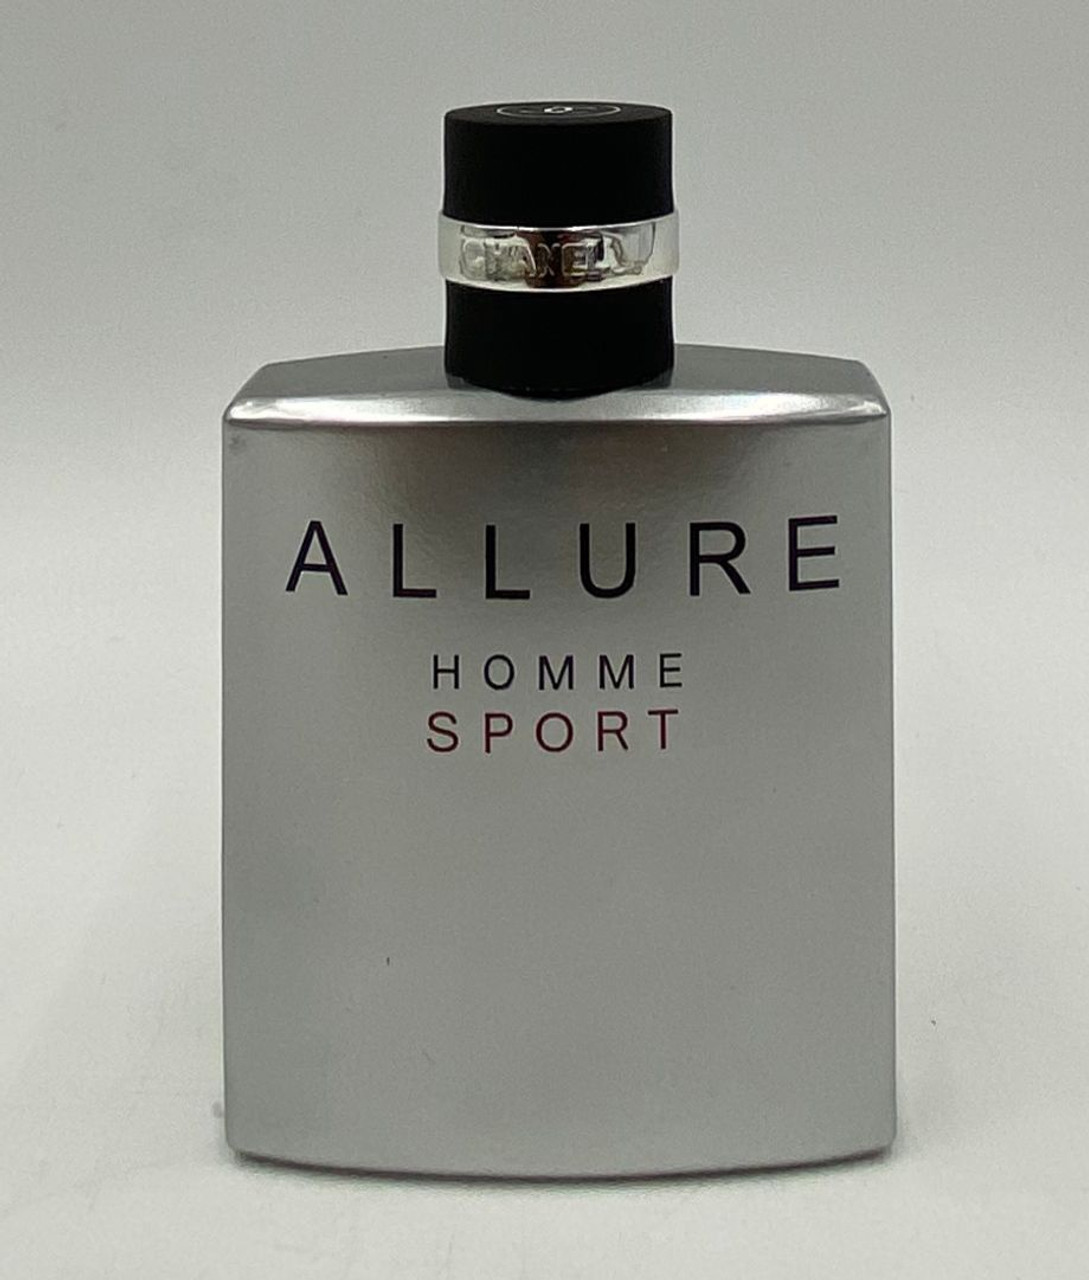 Inspired by Allure Homme Sport - Quality Fragrance Oils - Dupe perfume  impression, smell-a-like generic oils.